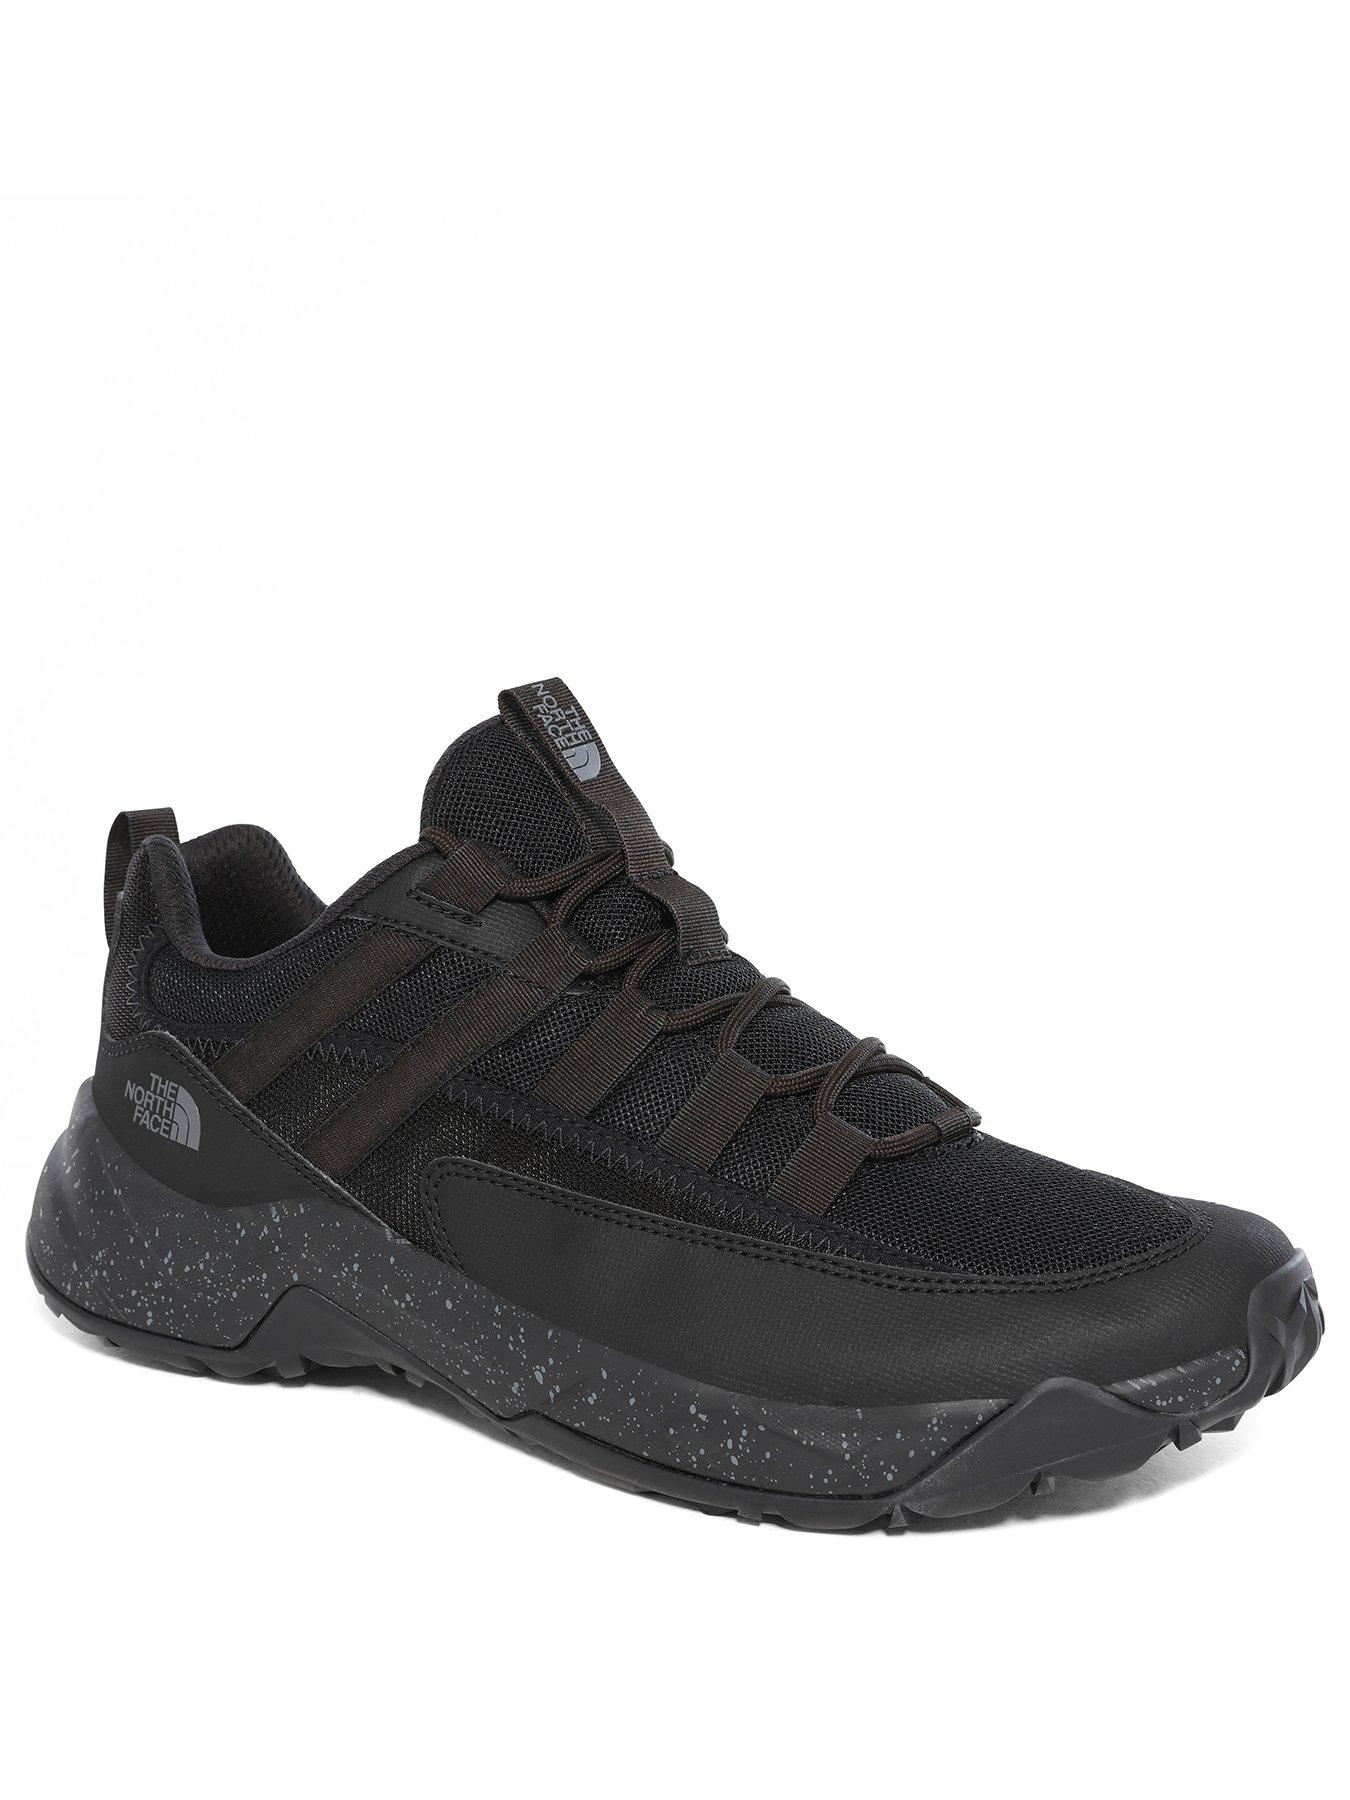 north face mens trainers